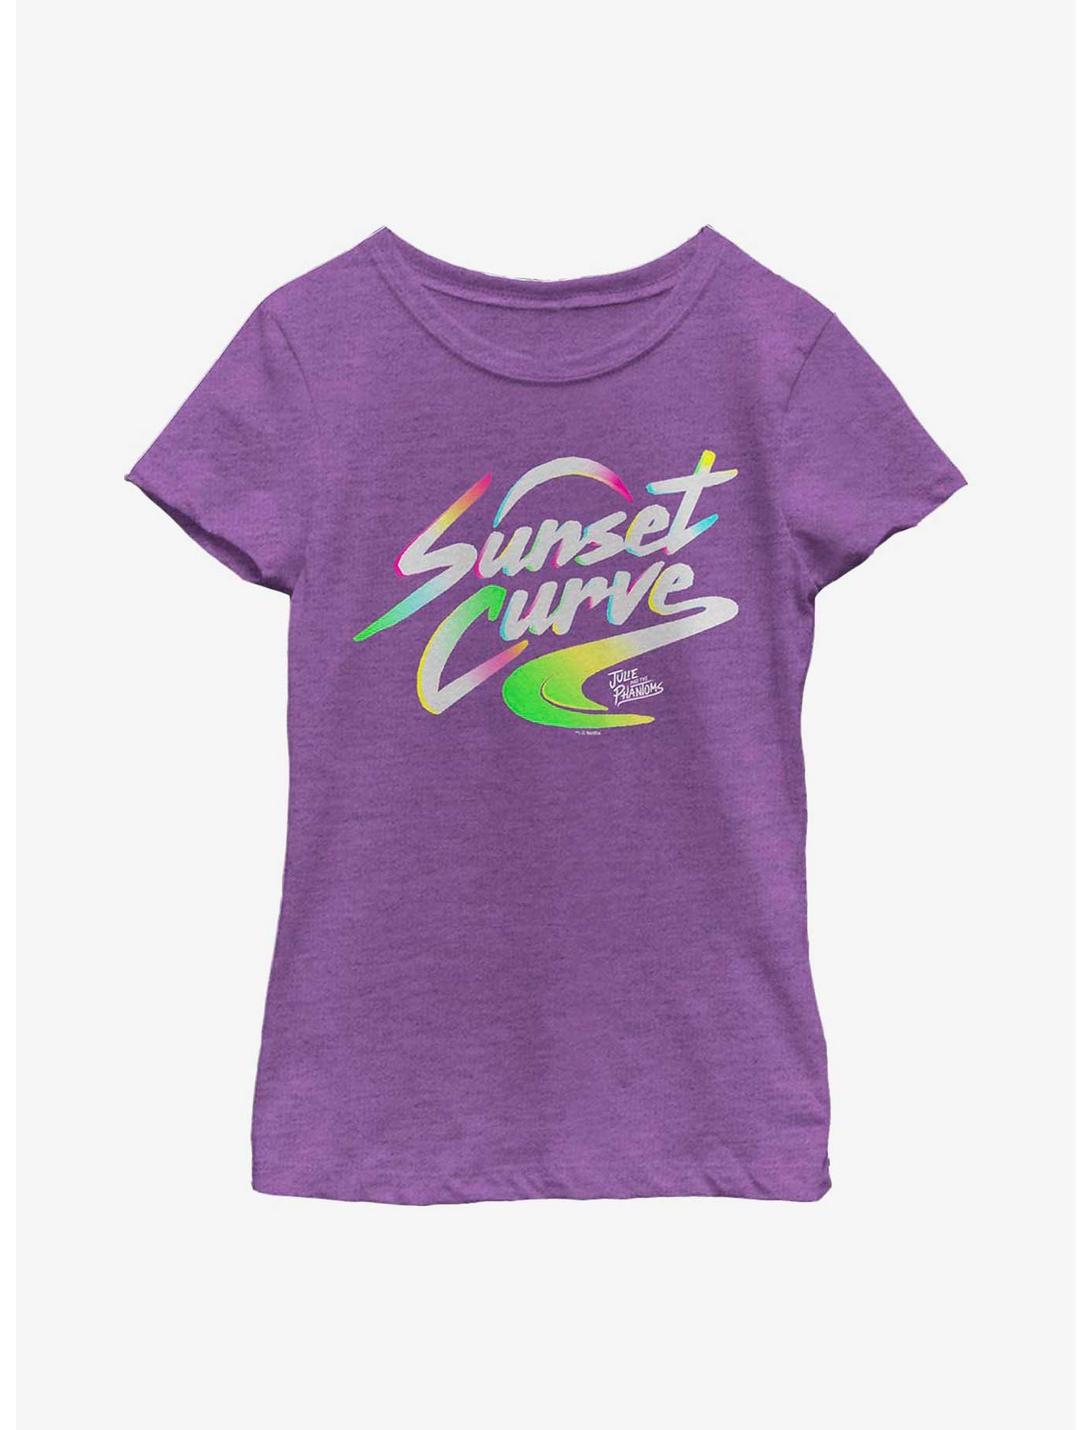 Julie And The Phantoms Sunset Curve Logo Youth Girls T-Shirt, PURPLE BERRY, hi-res